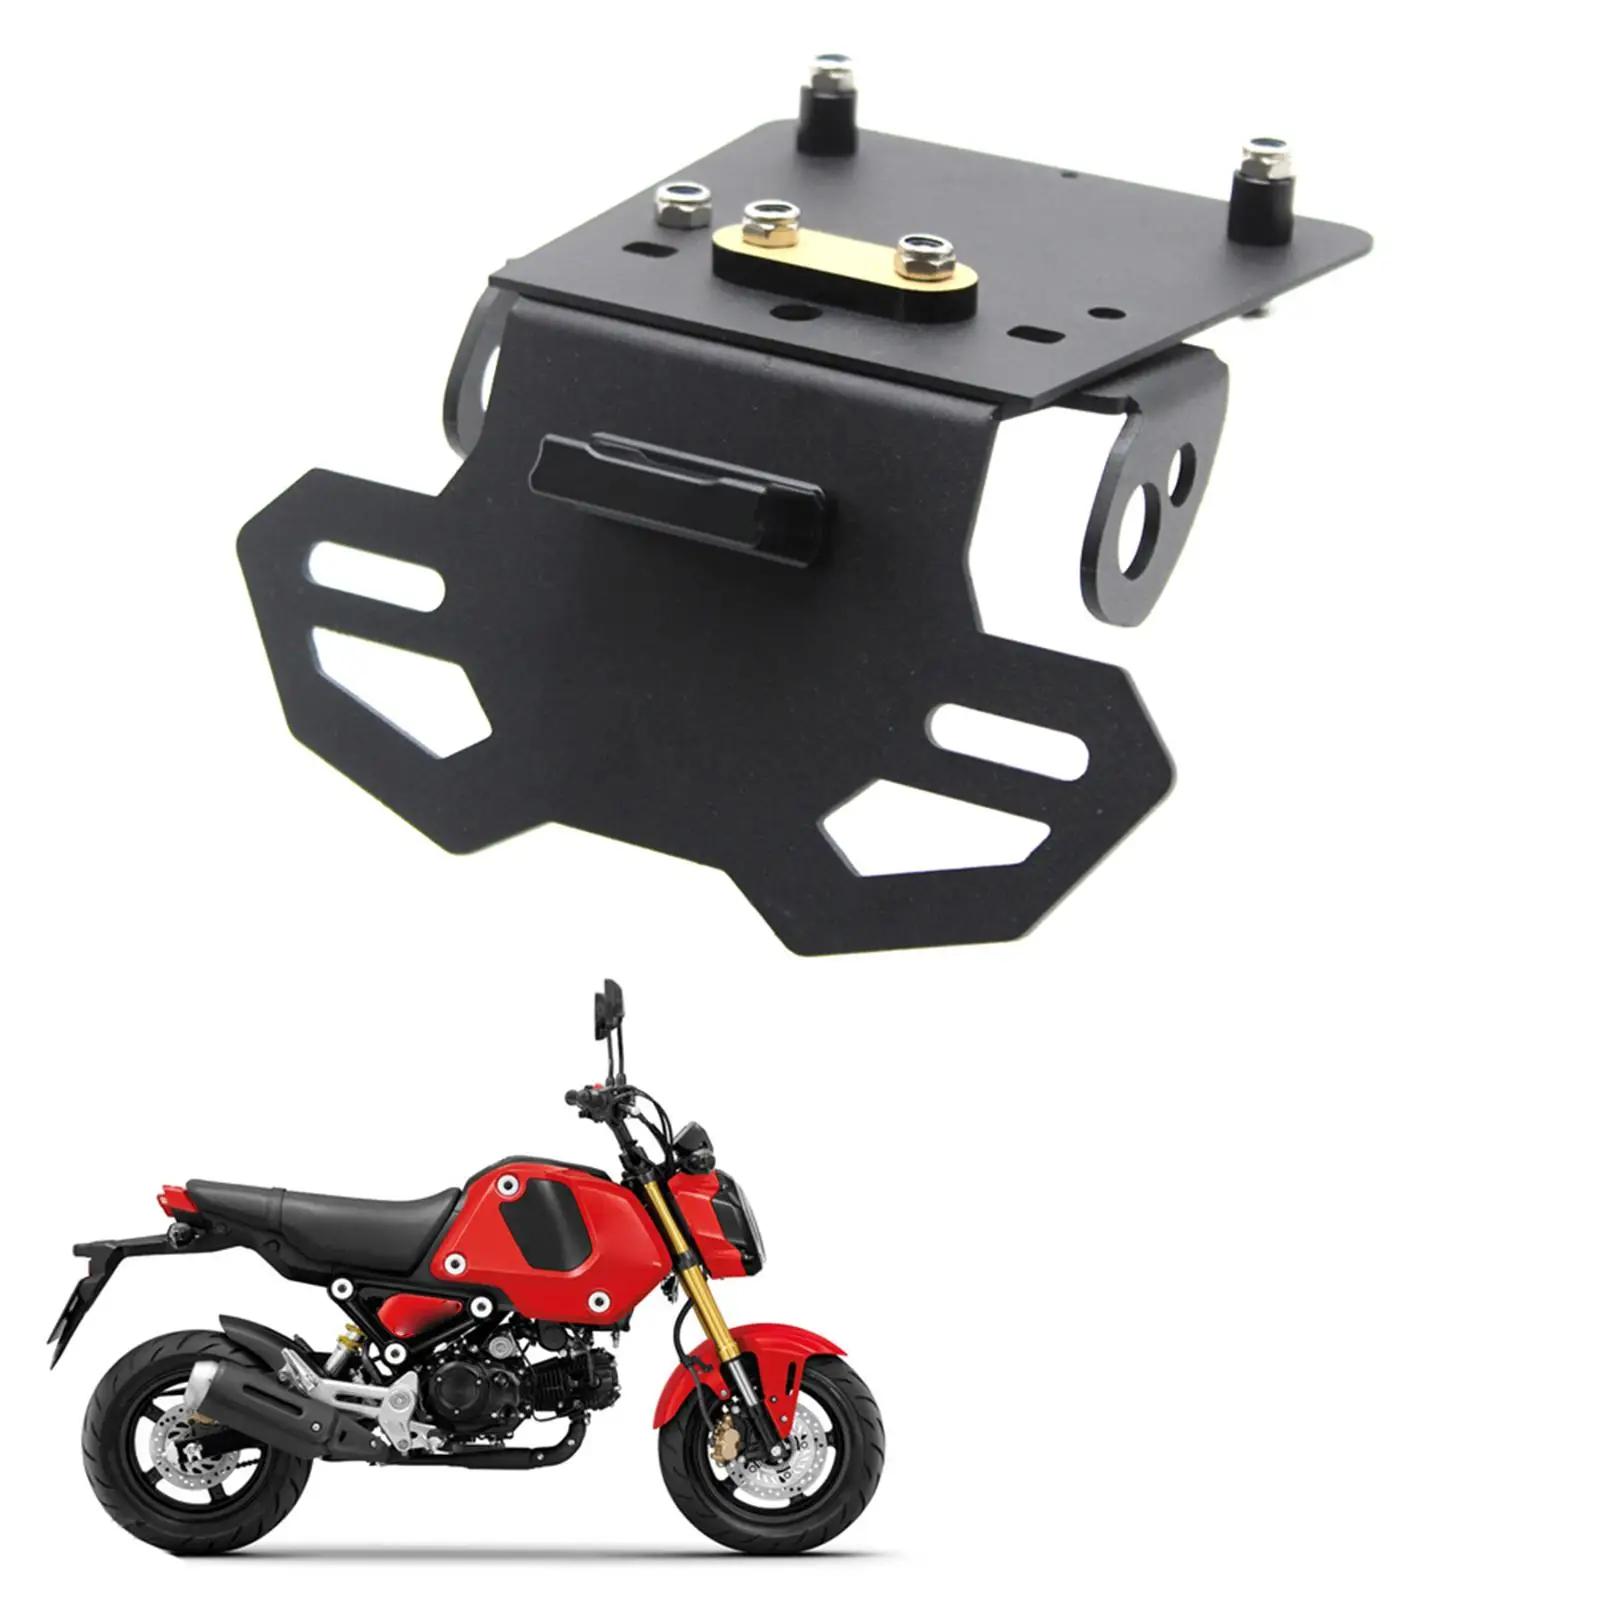 Motorcycle License Holder Frame Kit Aluminum Tail Fit for Honda Msx 125 Grom Replacement Spare Parts Easy to Install